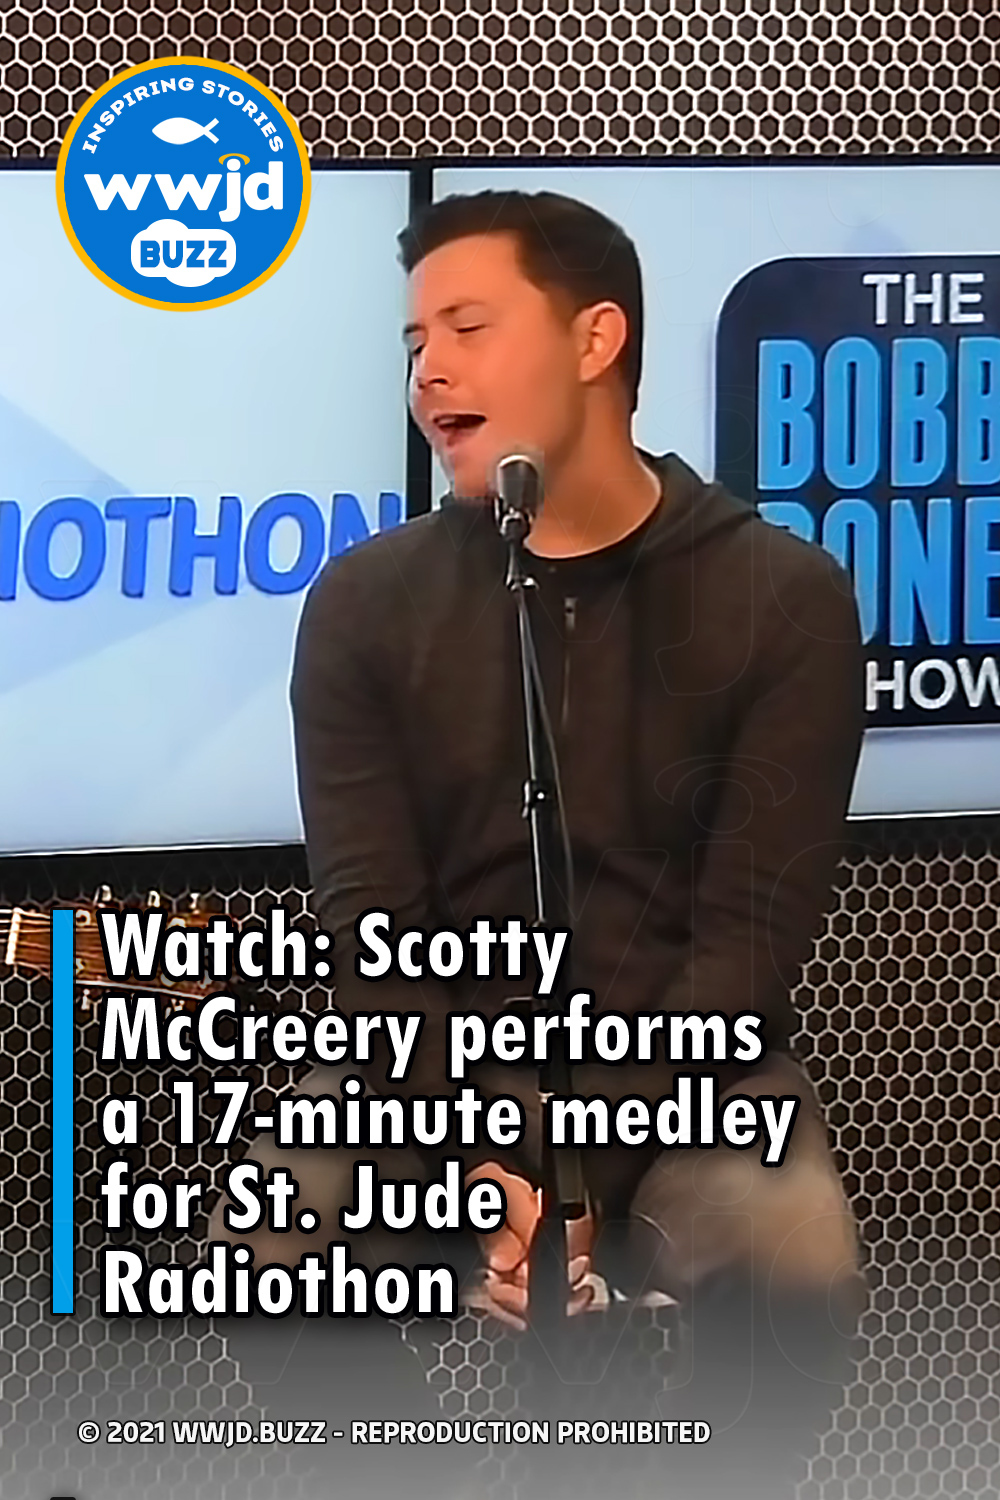 Watch: Scotty McCreery performs a 17-minute medley for St. Jude Radiothon